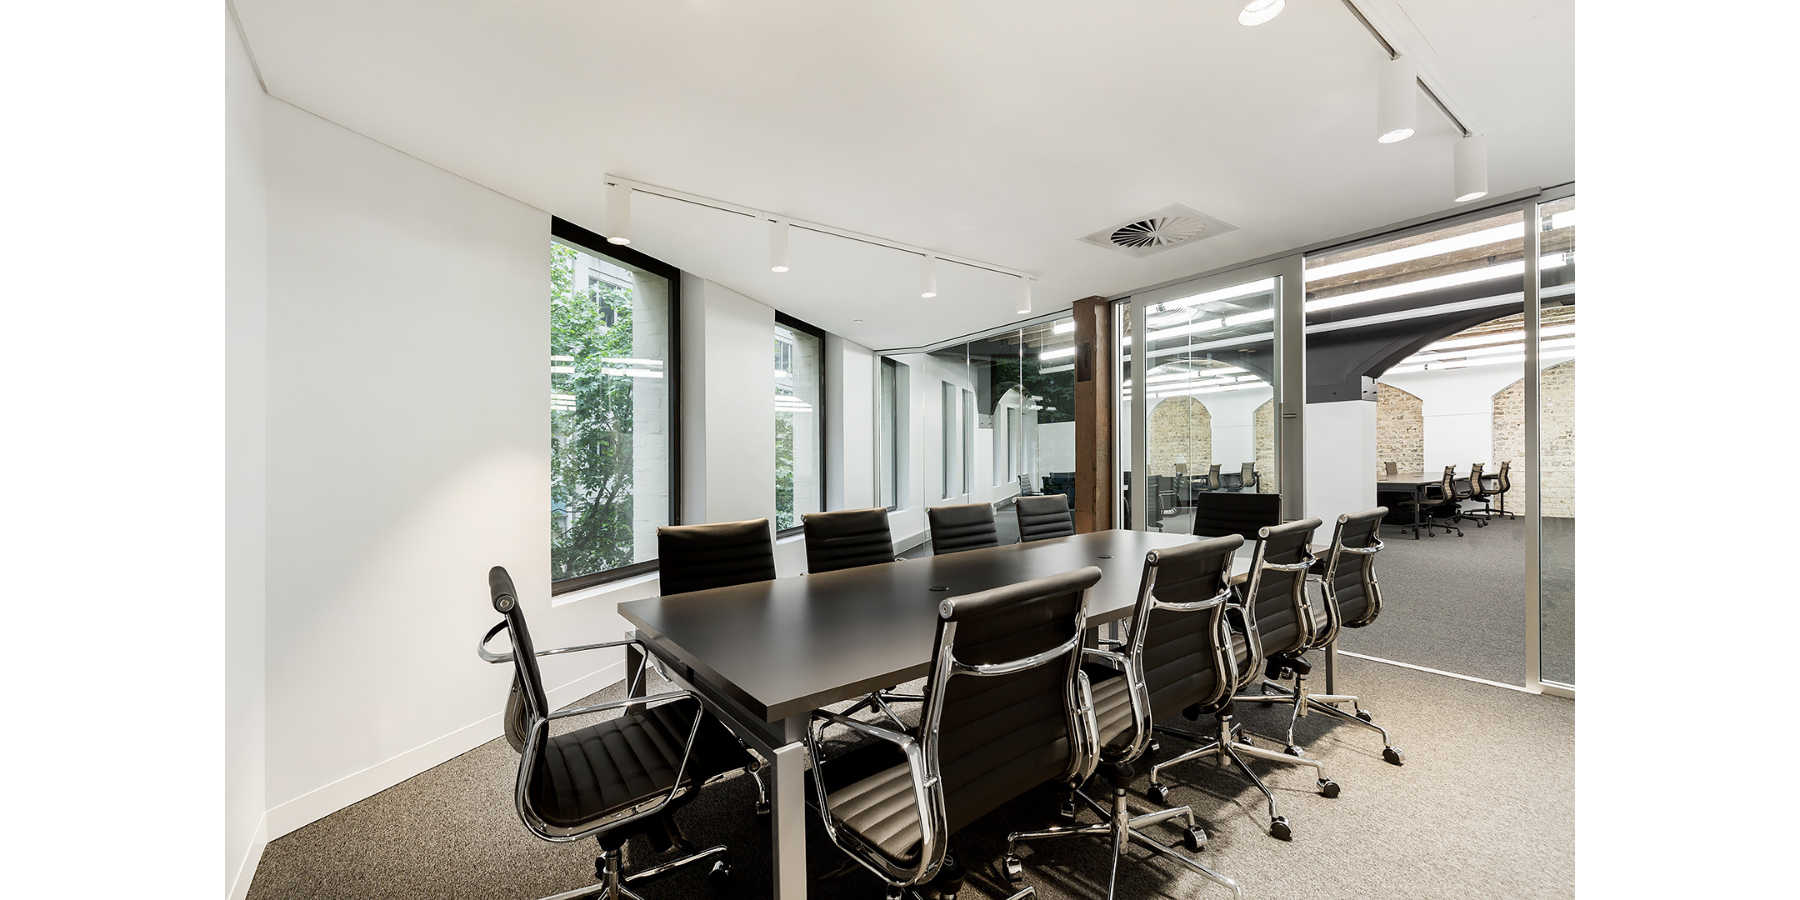 Leasing Imagery - Boardroom